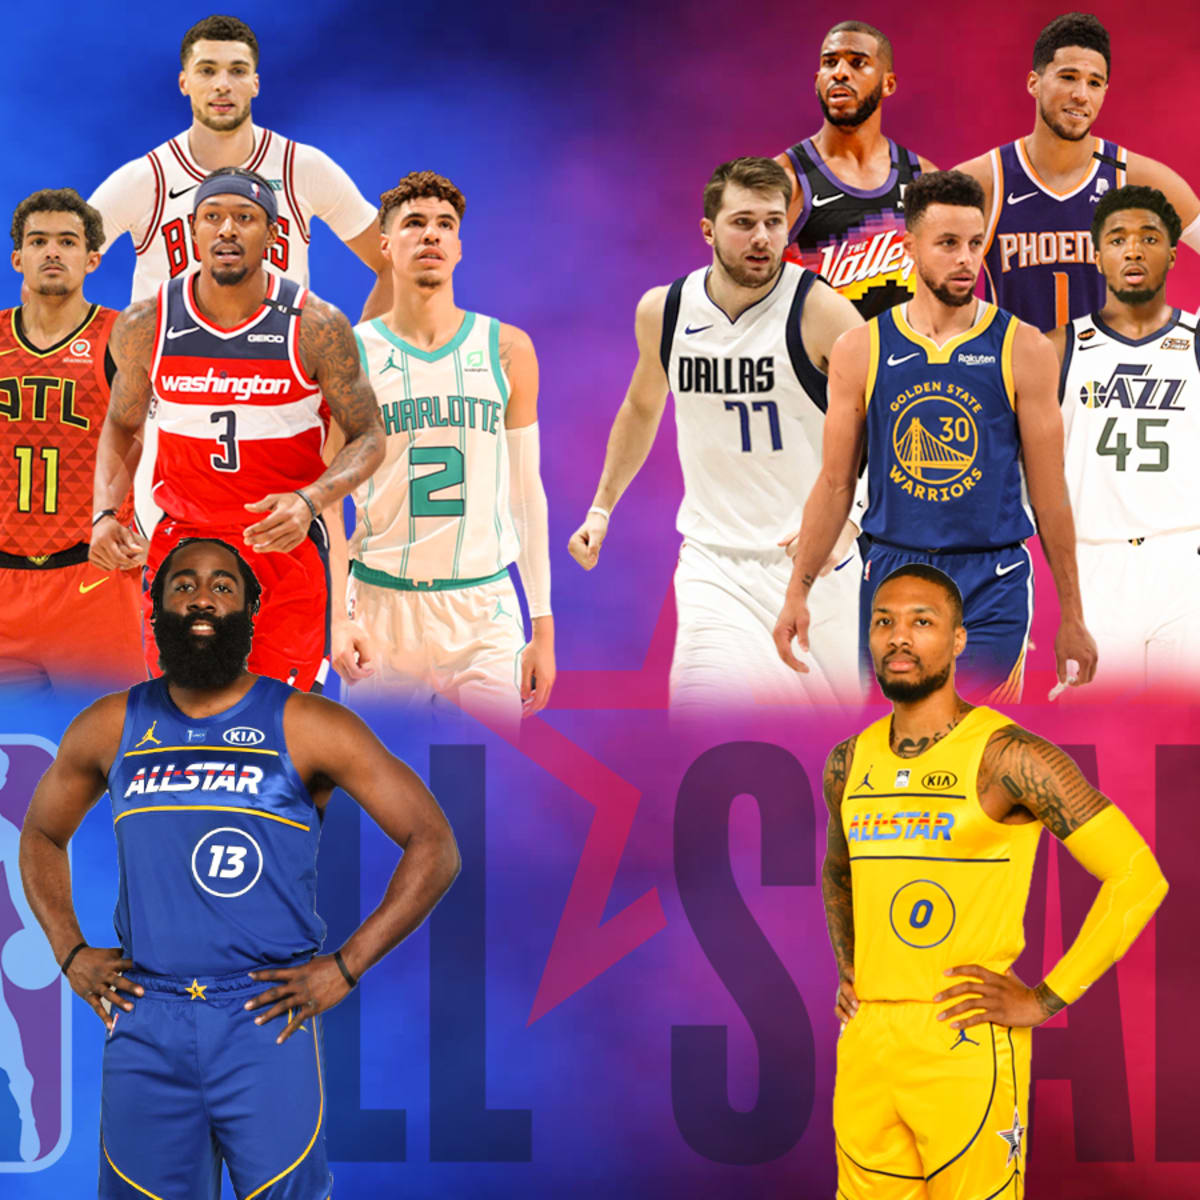 Western Conference All-Stars 2020-2021 Home Jersey